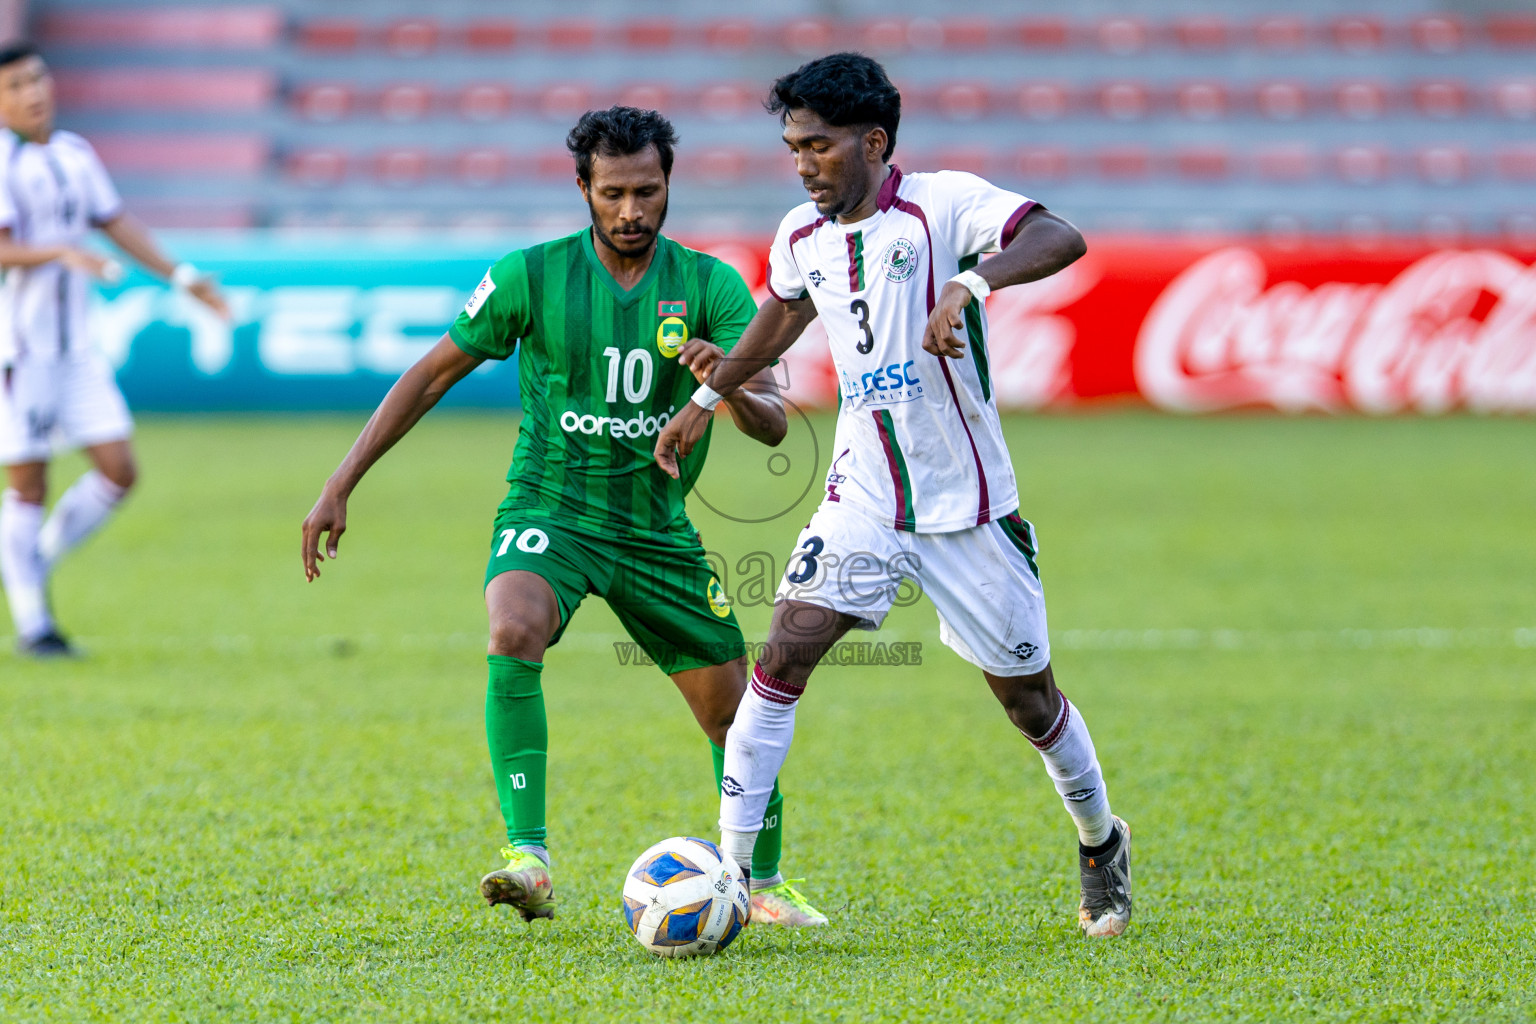 Maziya Sports & Recreation Club vs Mohun Bagan Super Giant in the group stage of AFC Cup 2023 held in the National Stadium, Male, Maldives, on Monday 11th December 2023. Photos: Mohamed Mahfooz Moosa